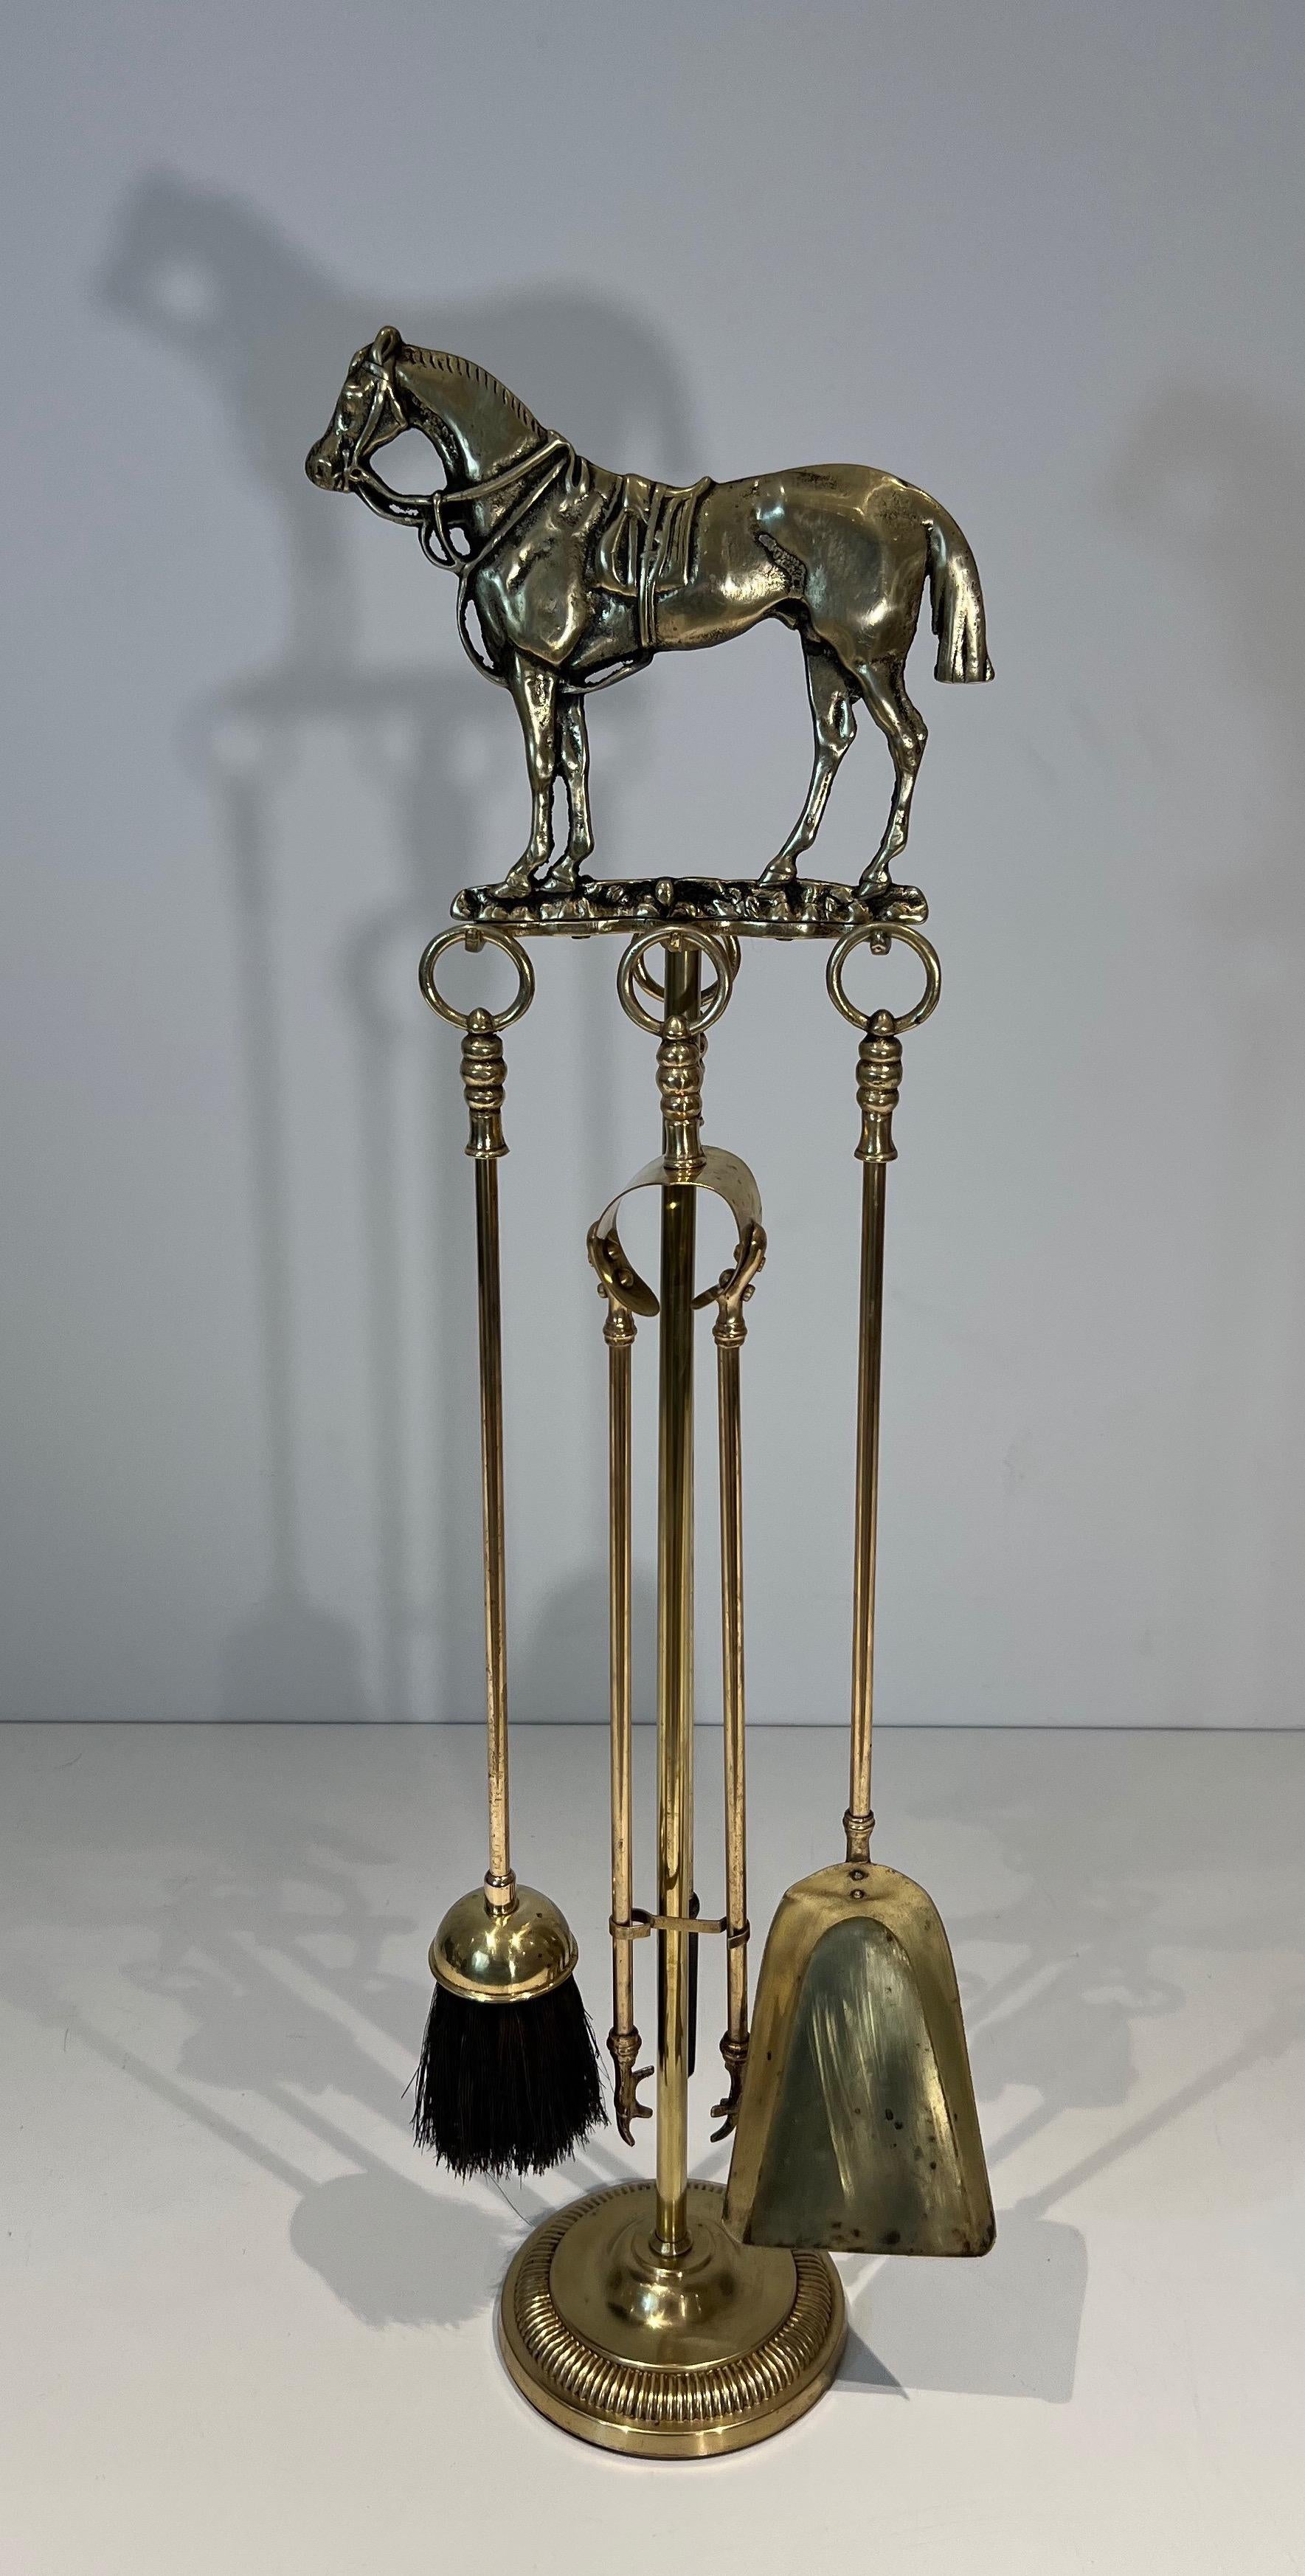 This very rare and beautiful Fireplace Tools on stand is made of brass and bronze. The piece is surmounted by a sculpture representing a Horse. This is a French work. Circa 1920